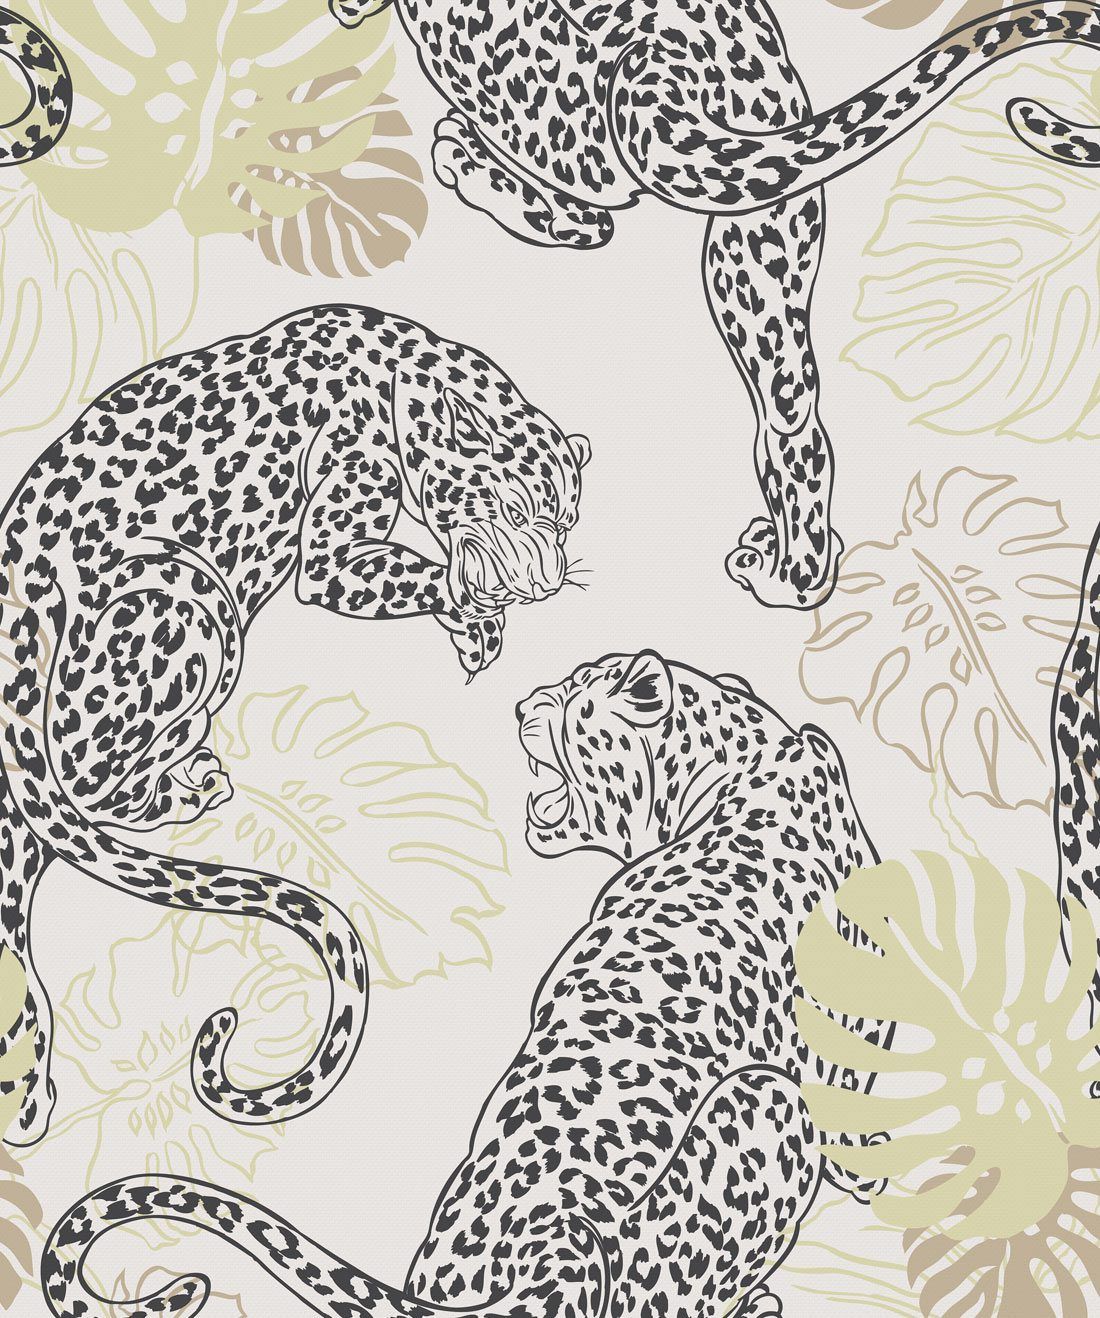 Removable Water-Activated Wallpaper Tropical Jungle Retro Teal Jaguars Leopards